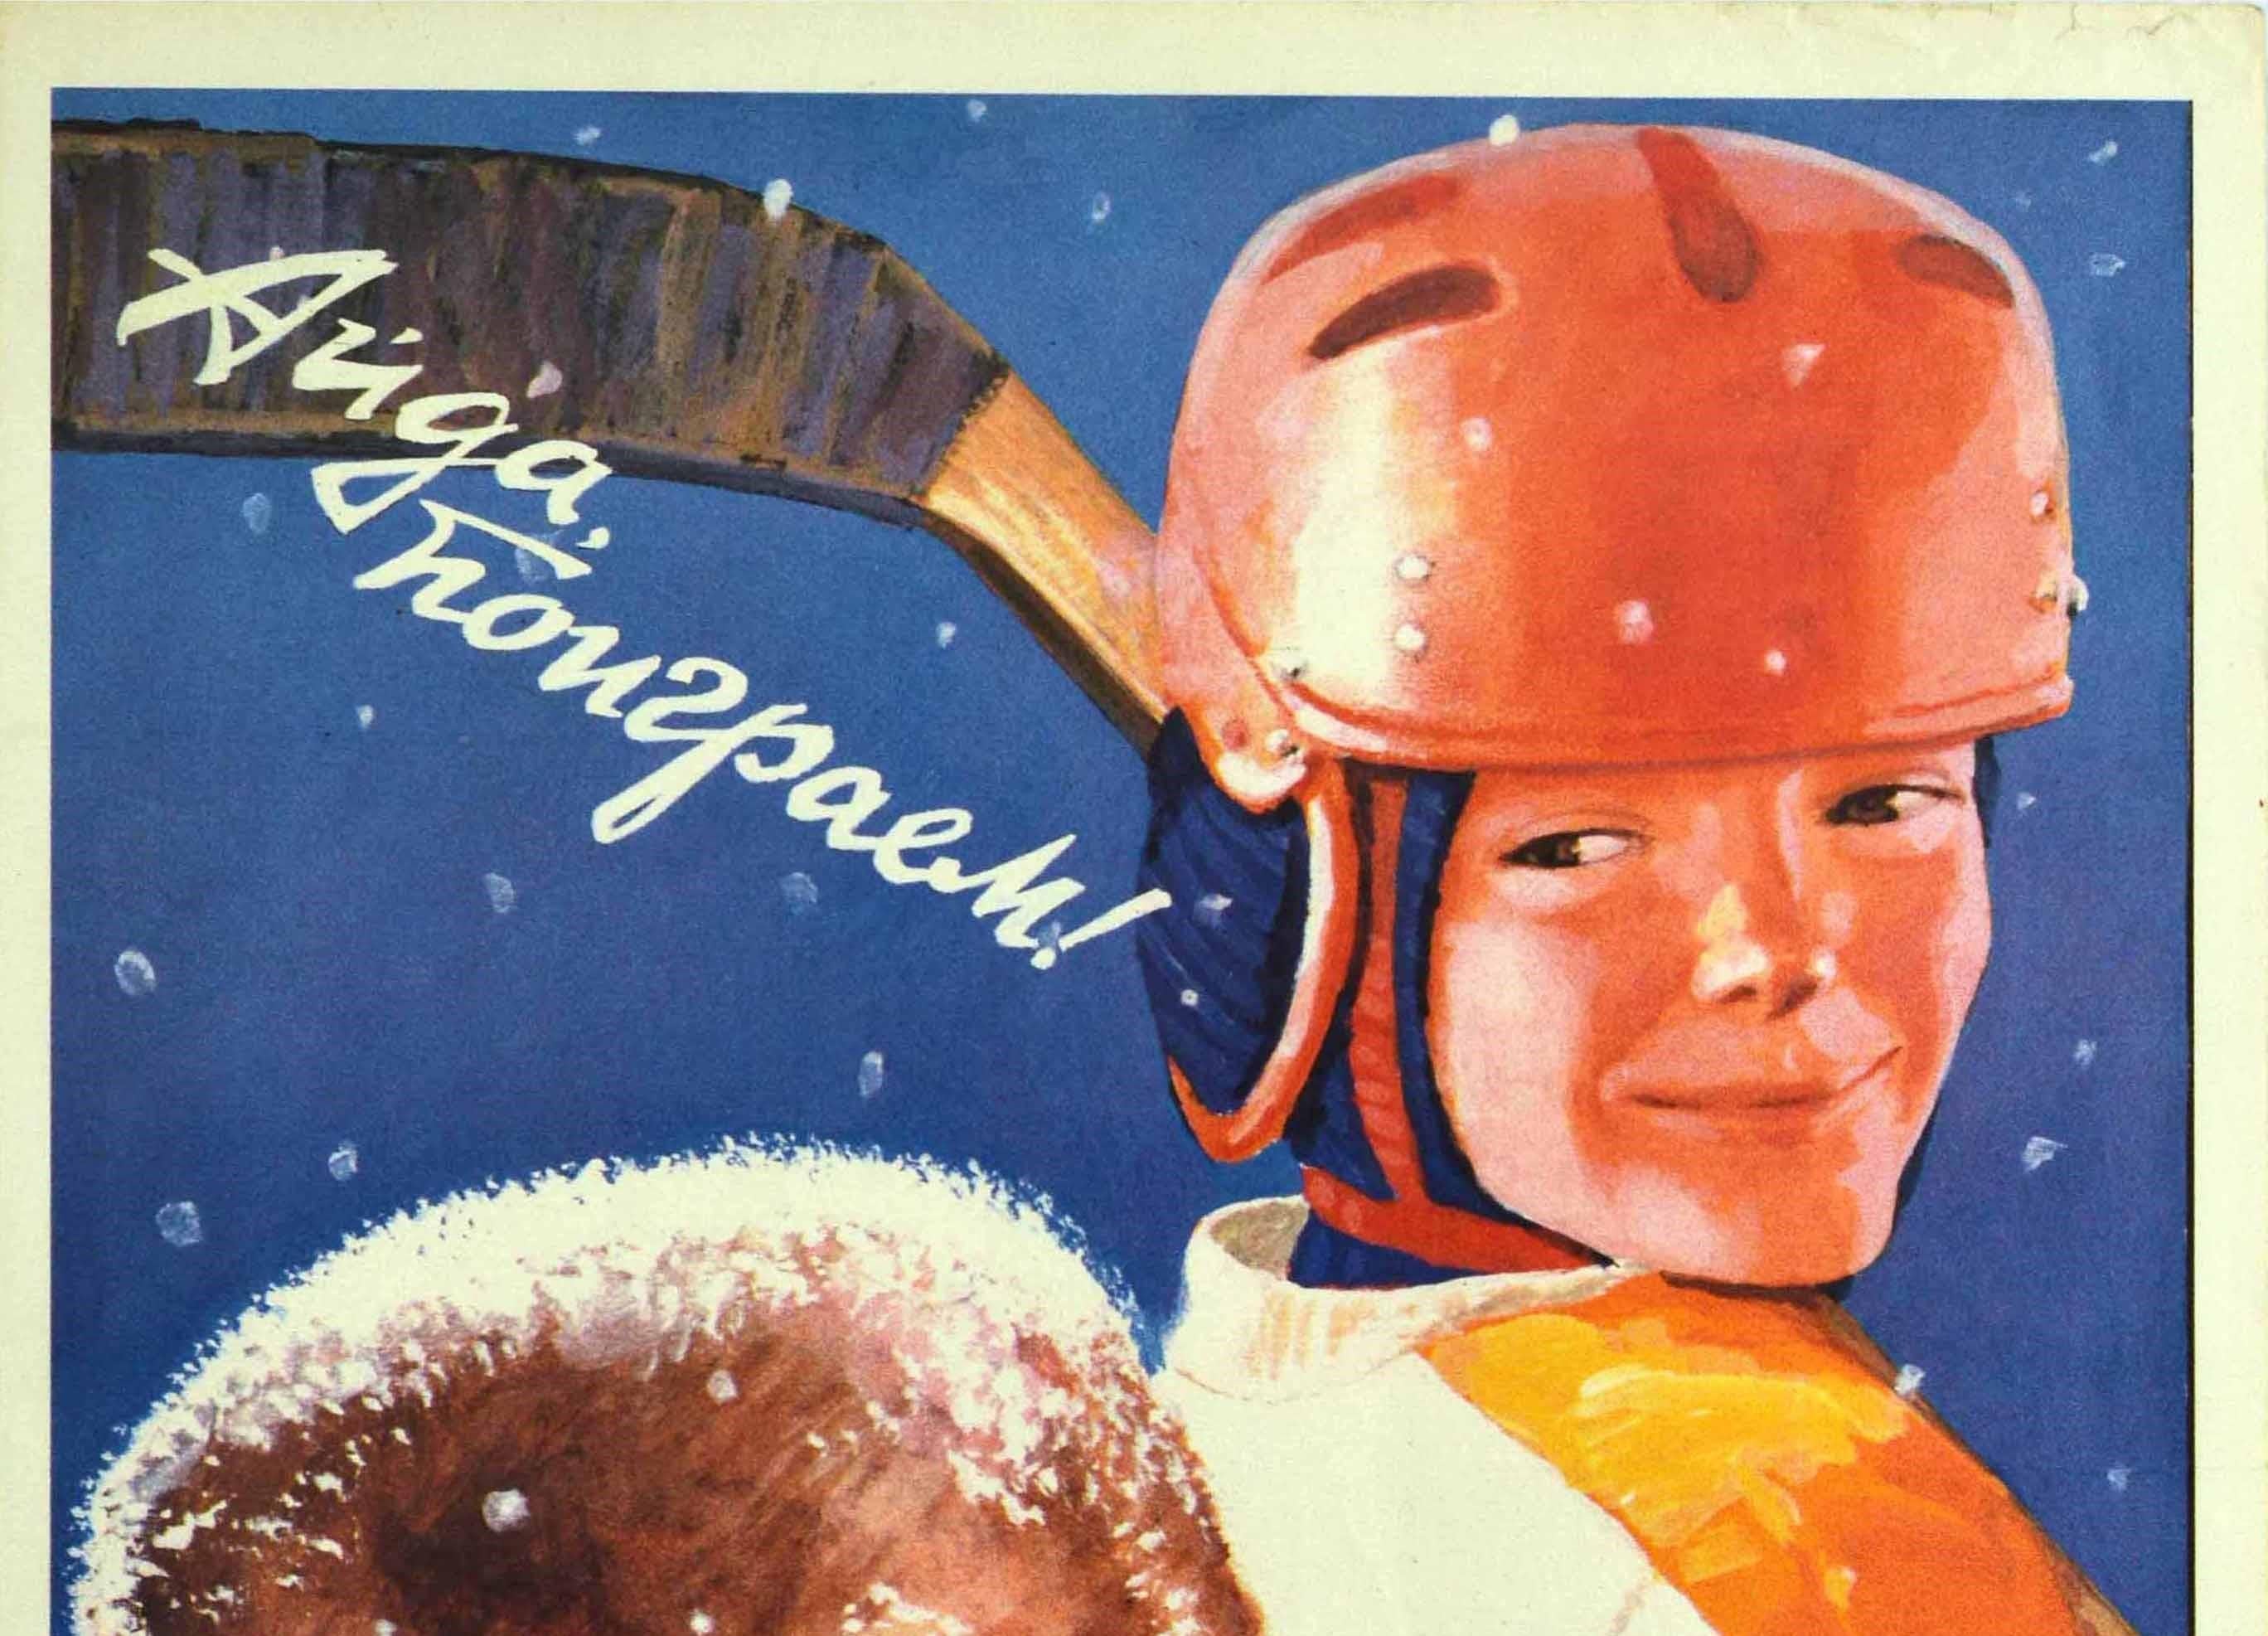 Original Vintage Poster Let's Go Play Ice Hockey Soviet Sport Winter USSR - Print by Unknown